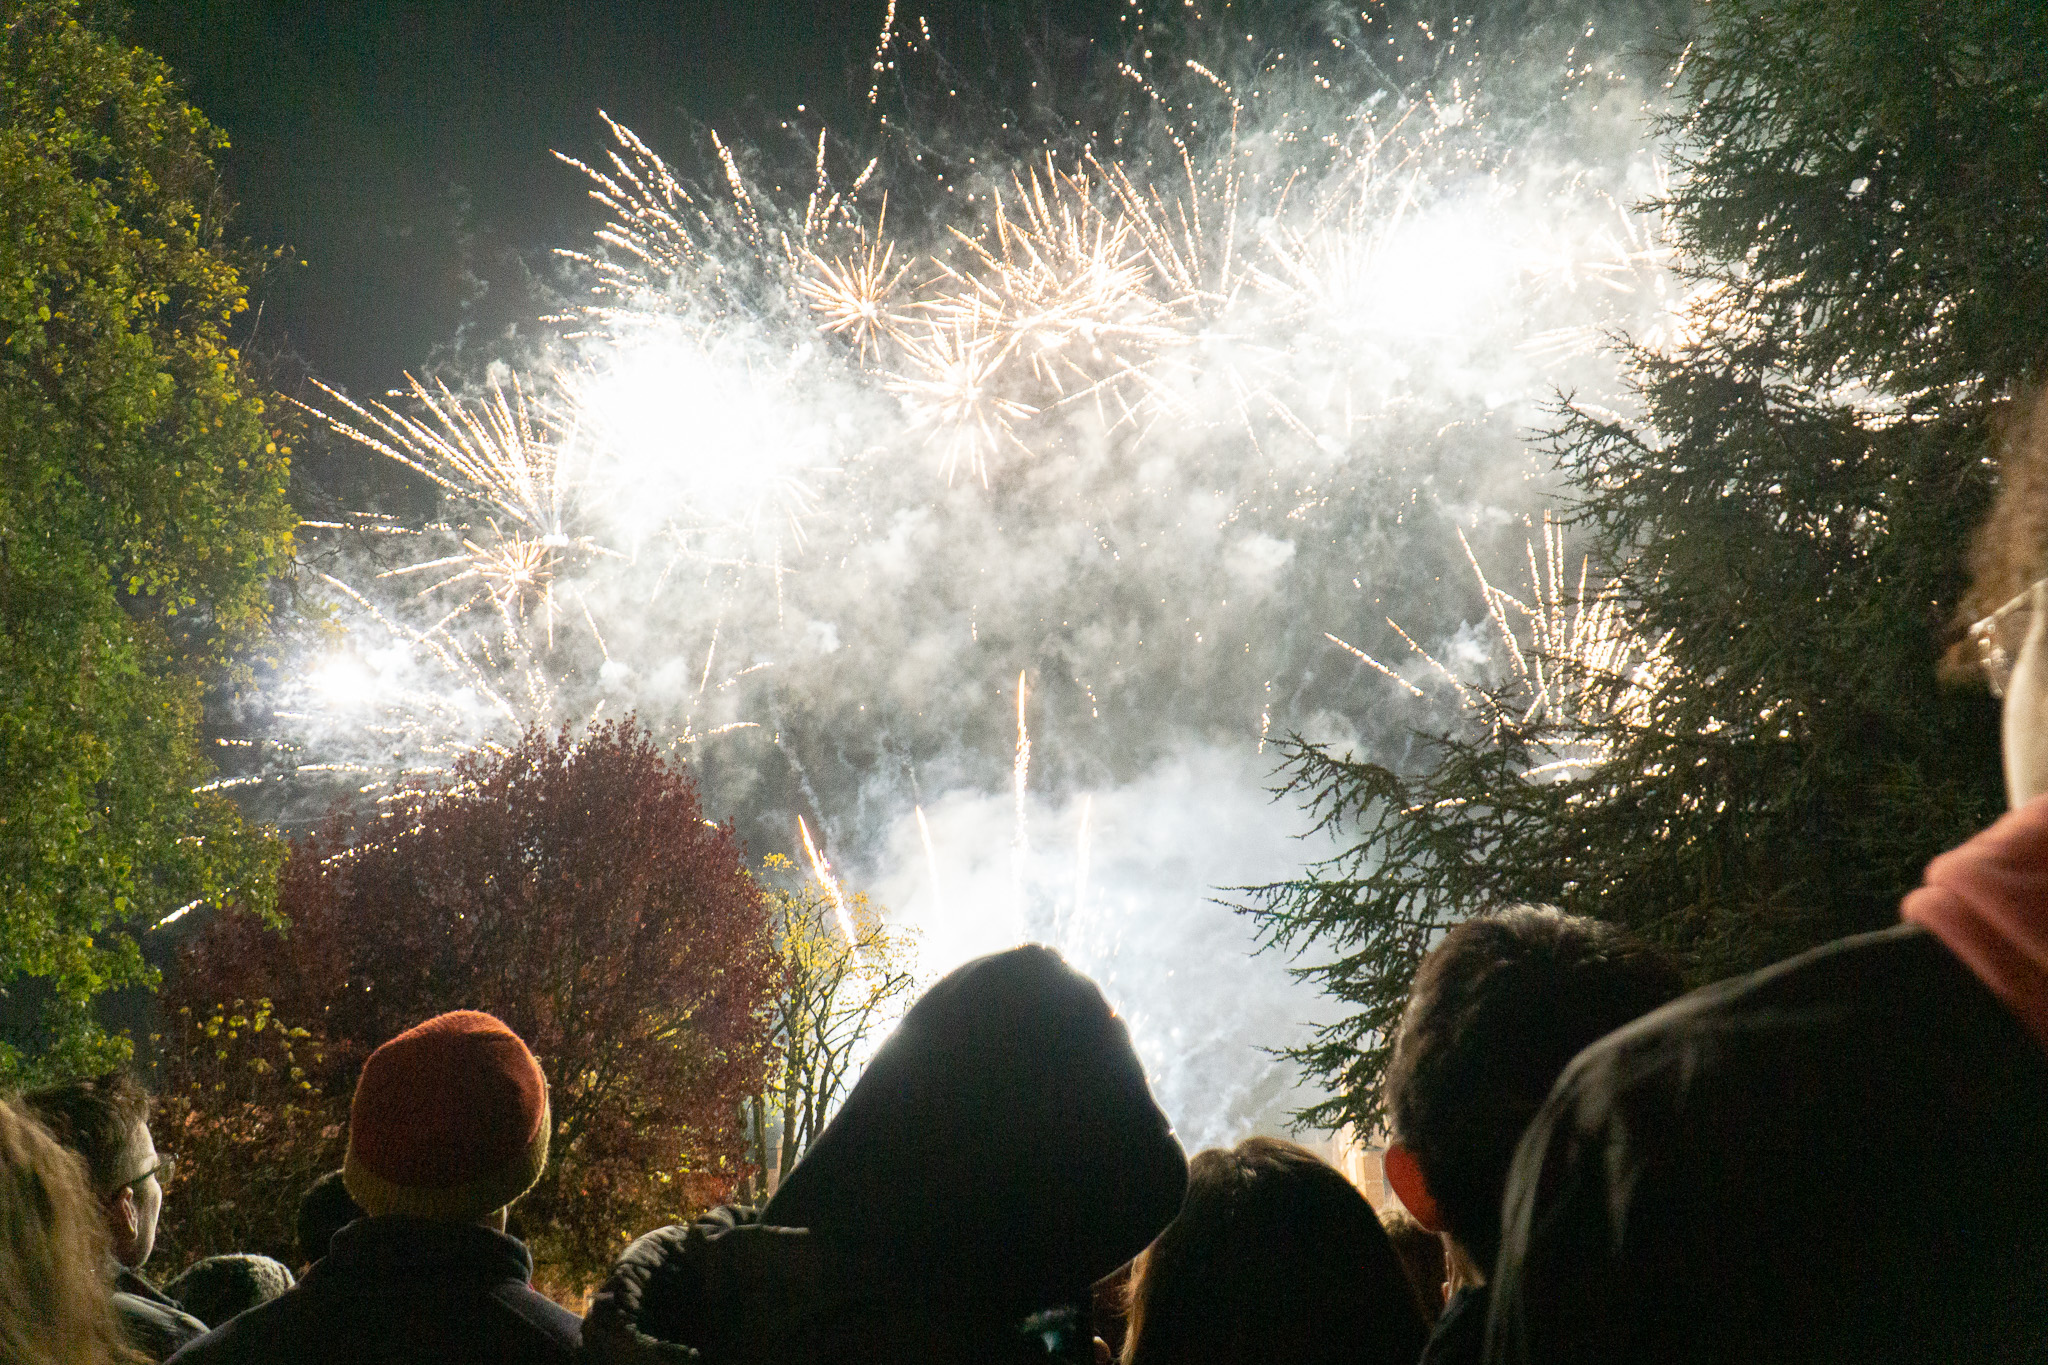 Our annual college fireworks display is always one of the highlights of the college calendar.